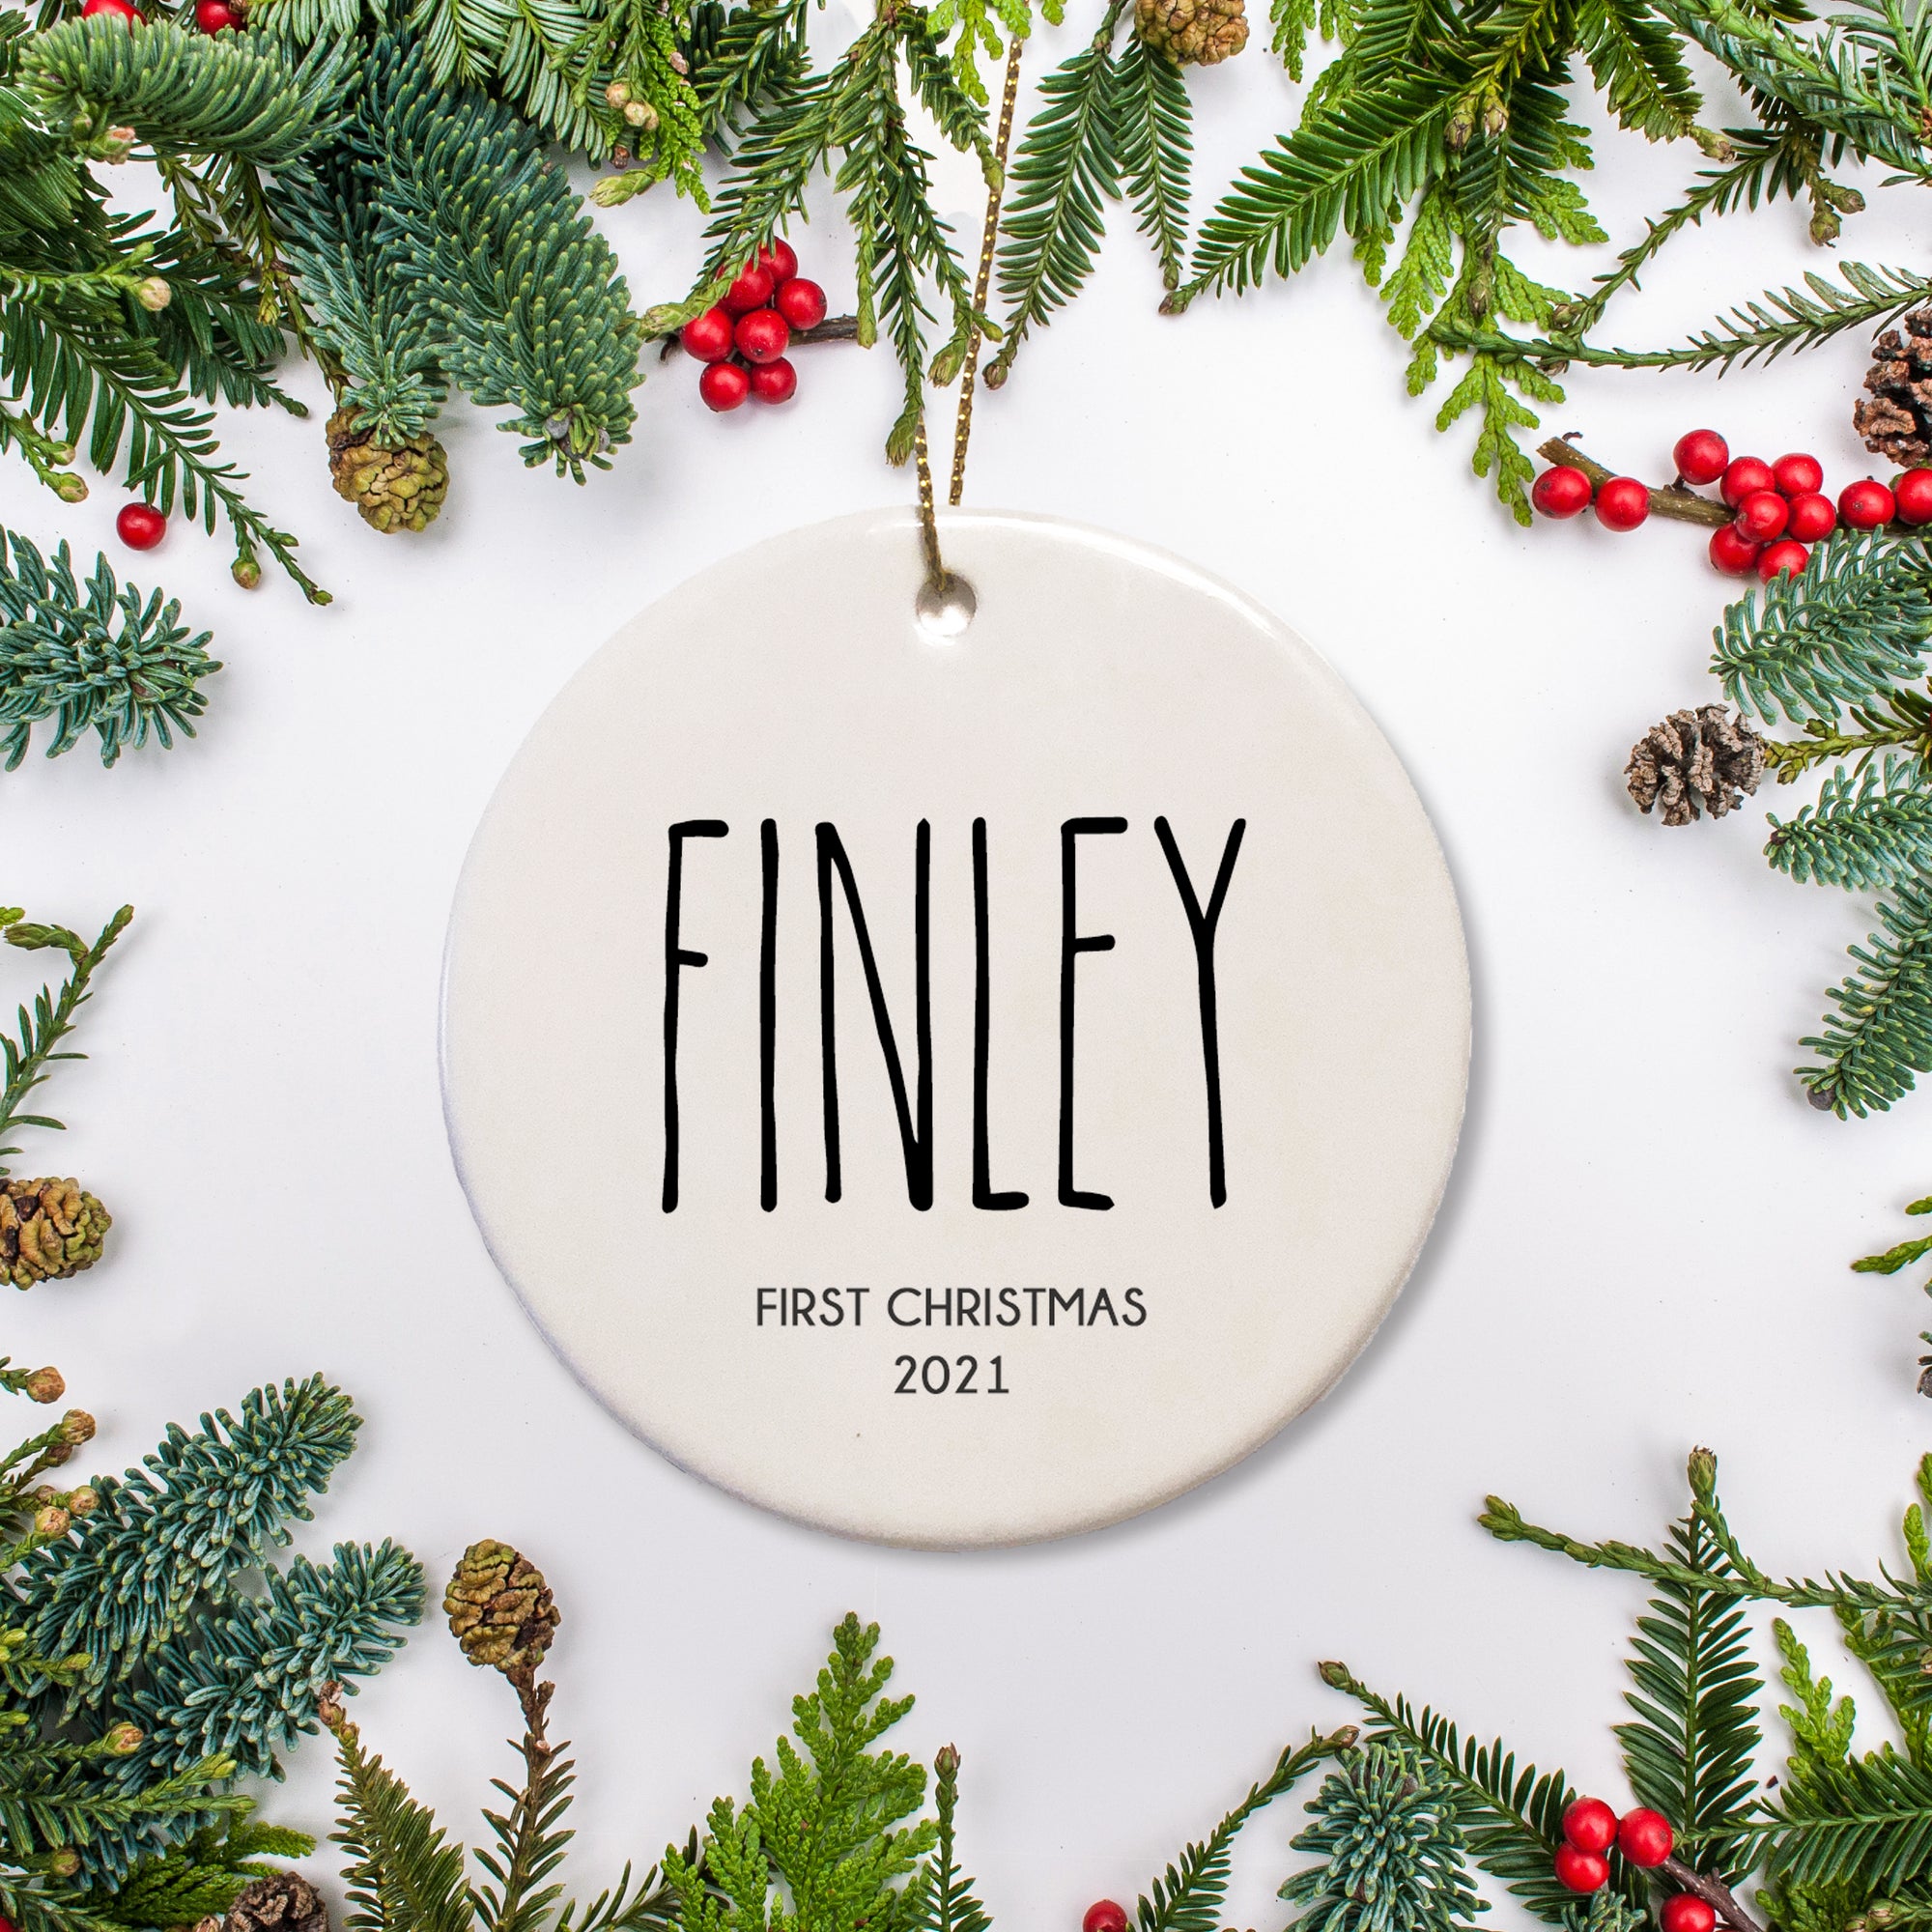 Personalized Christmas Ornament with name and year - optional back text can be added | Gift note | Pipsy.com